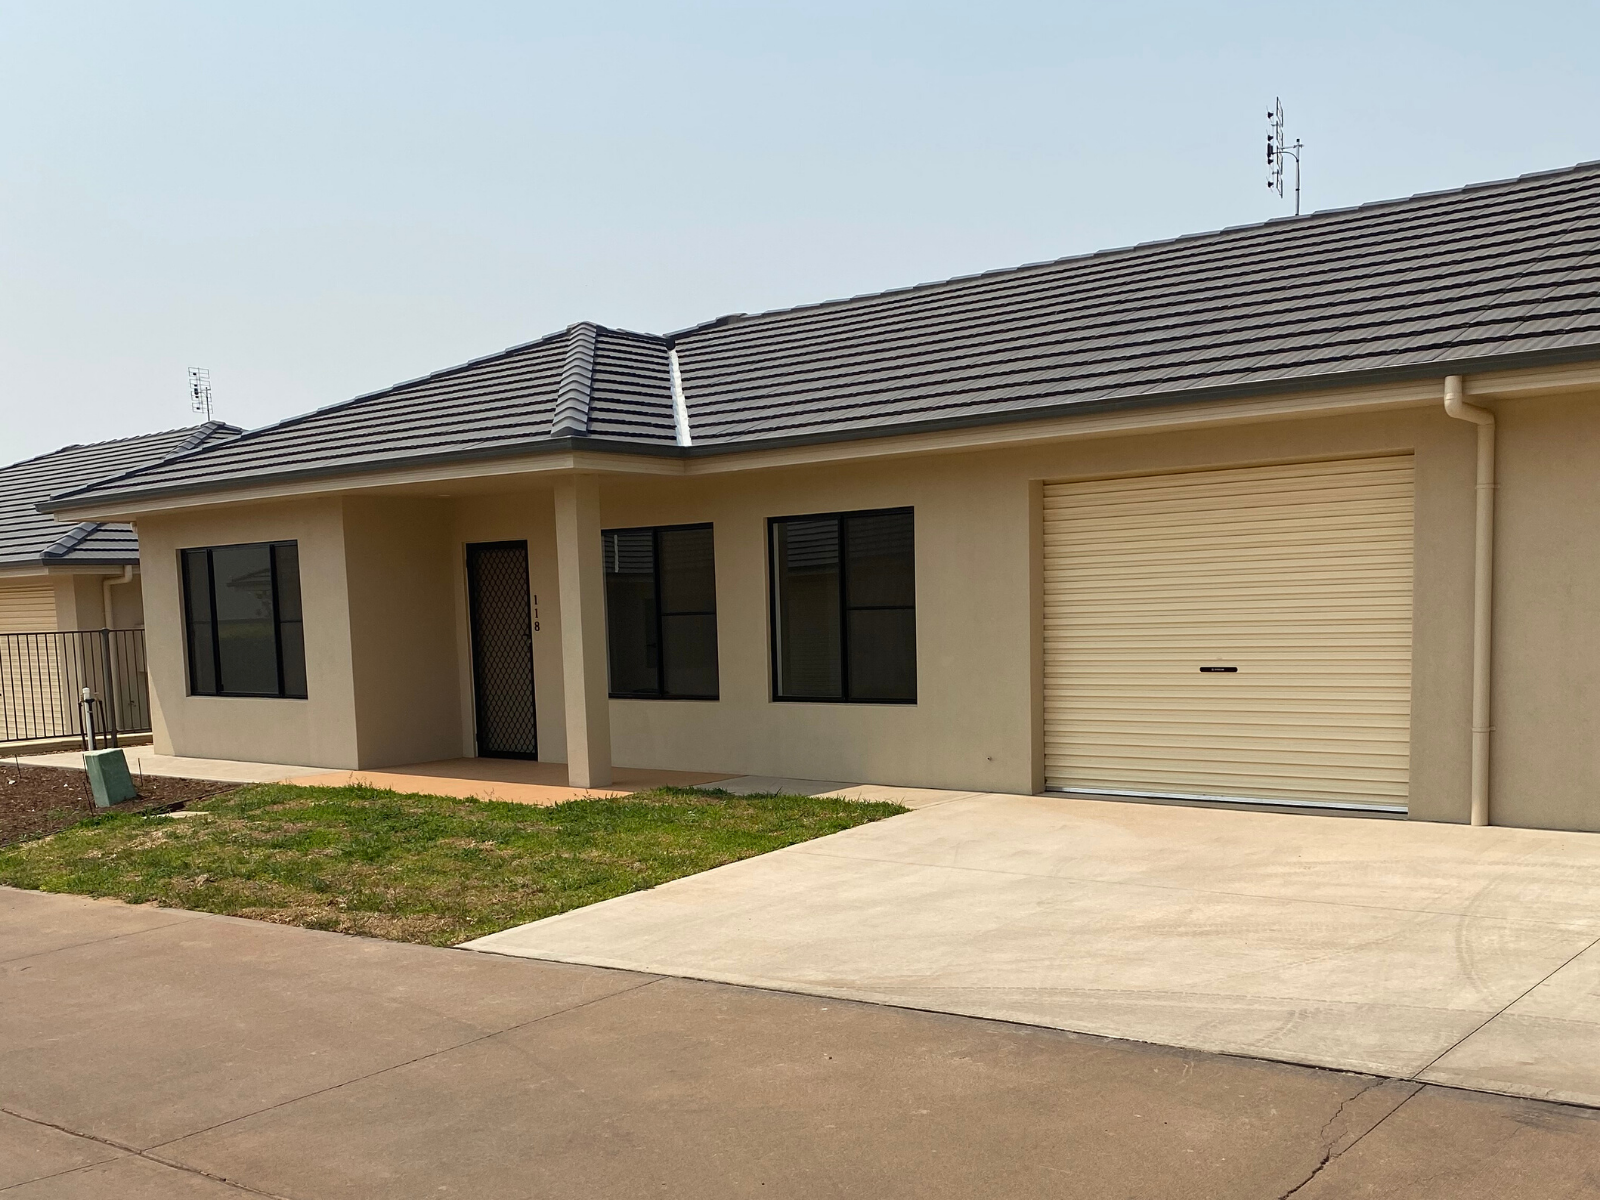 Horizons-Village-Dubbo-Newell-118-Front | RSL LifeCare - provide care and service to war veterans, retirement villages and accommodation, aged care services and assisted living